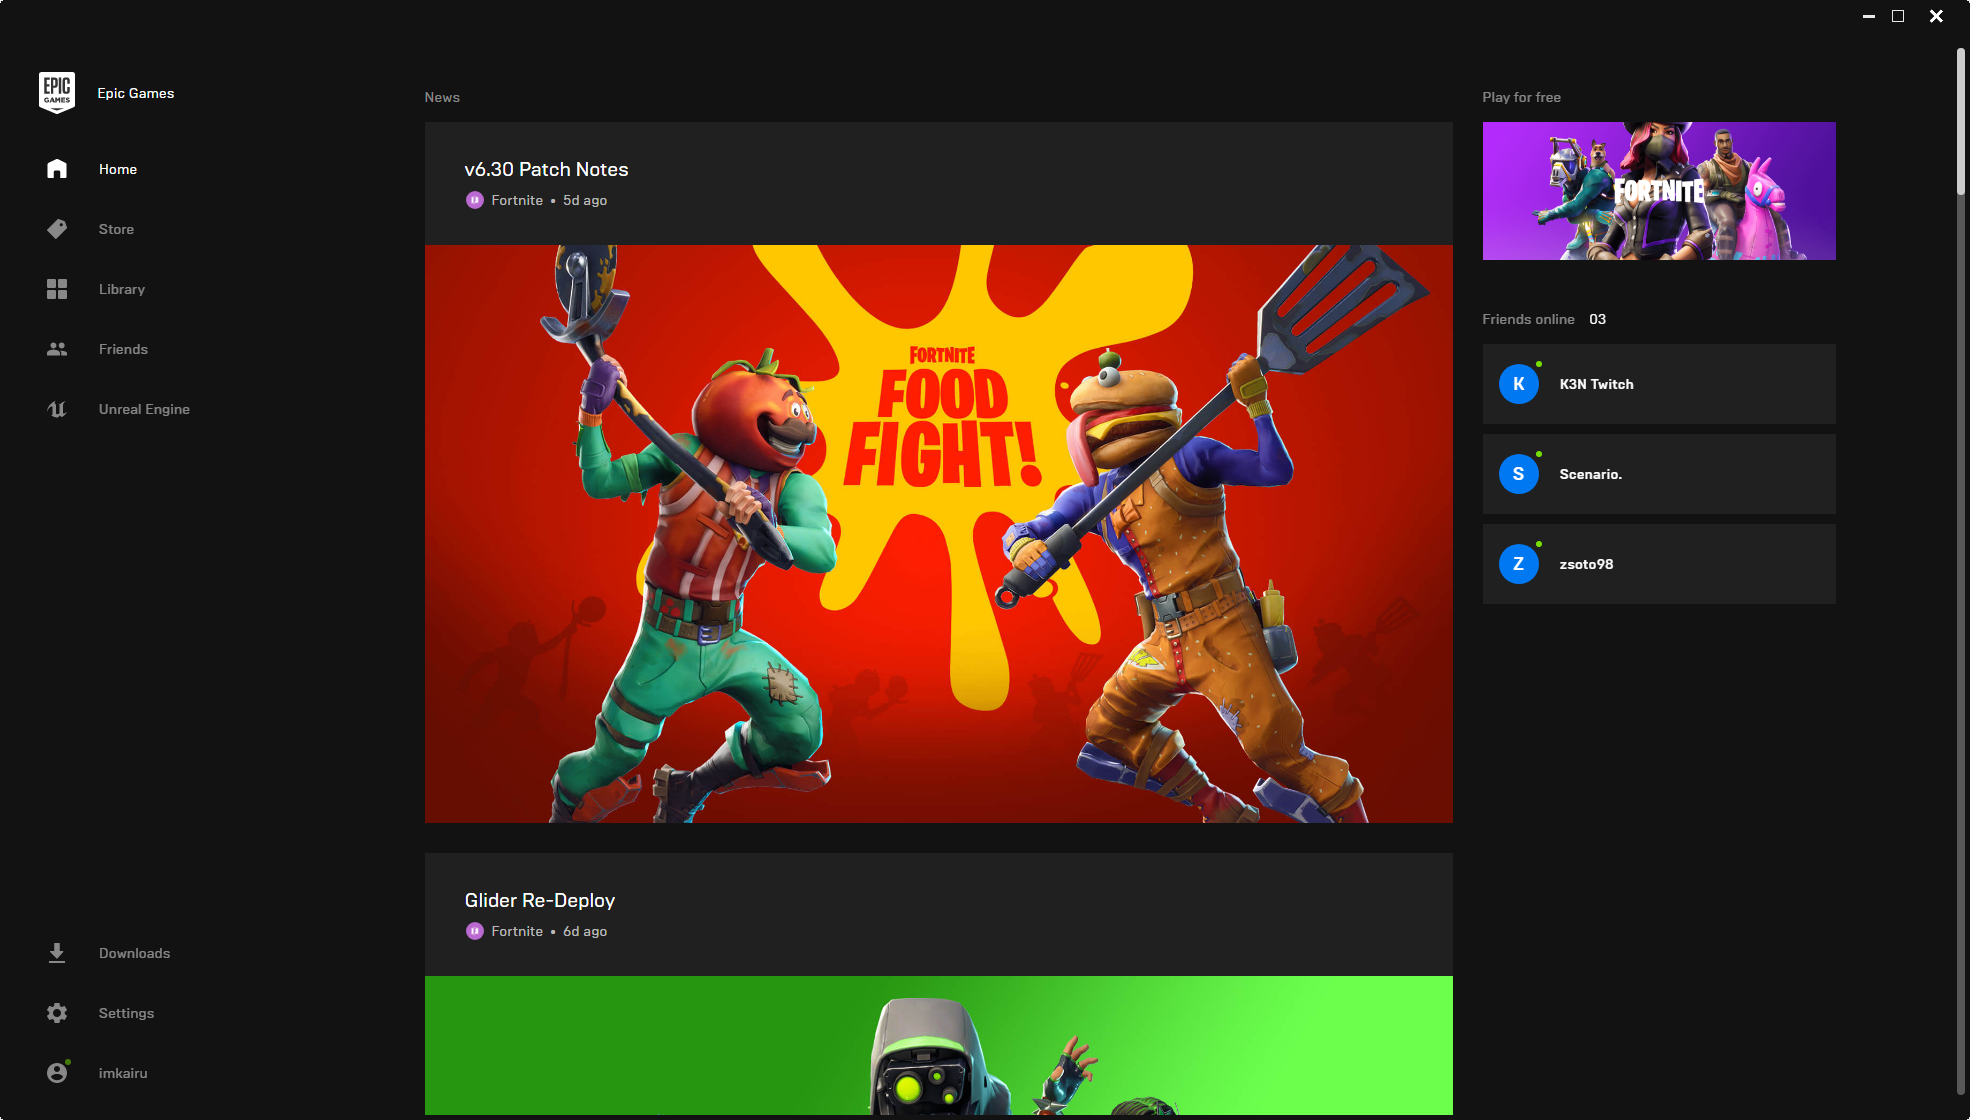 Epic Games Launcher Gets A Facelift In A New Beta - Here's How To Get It